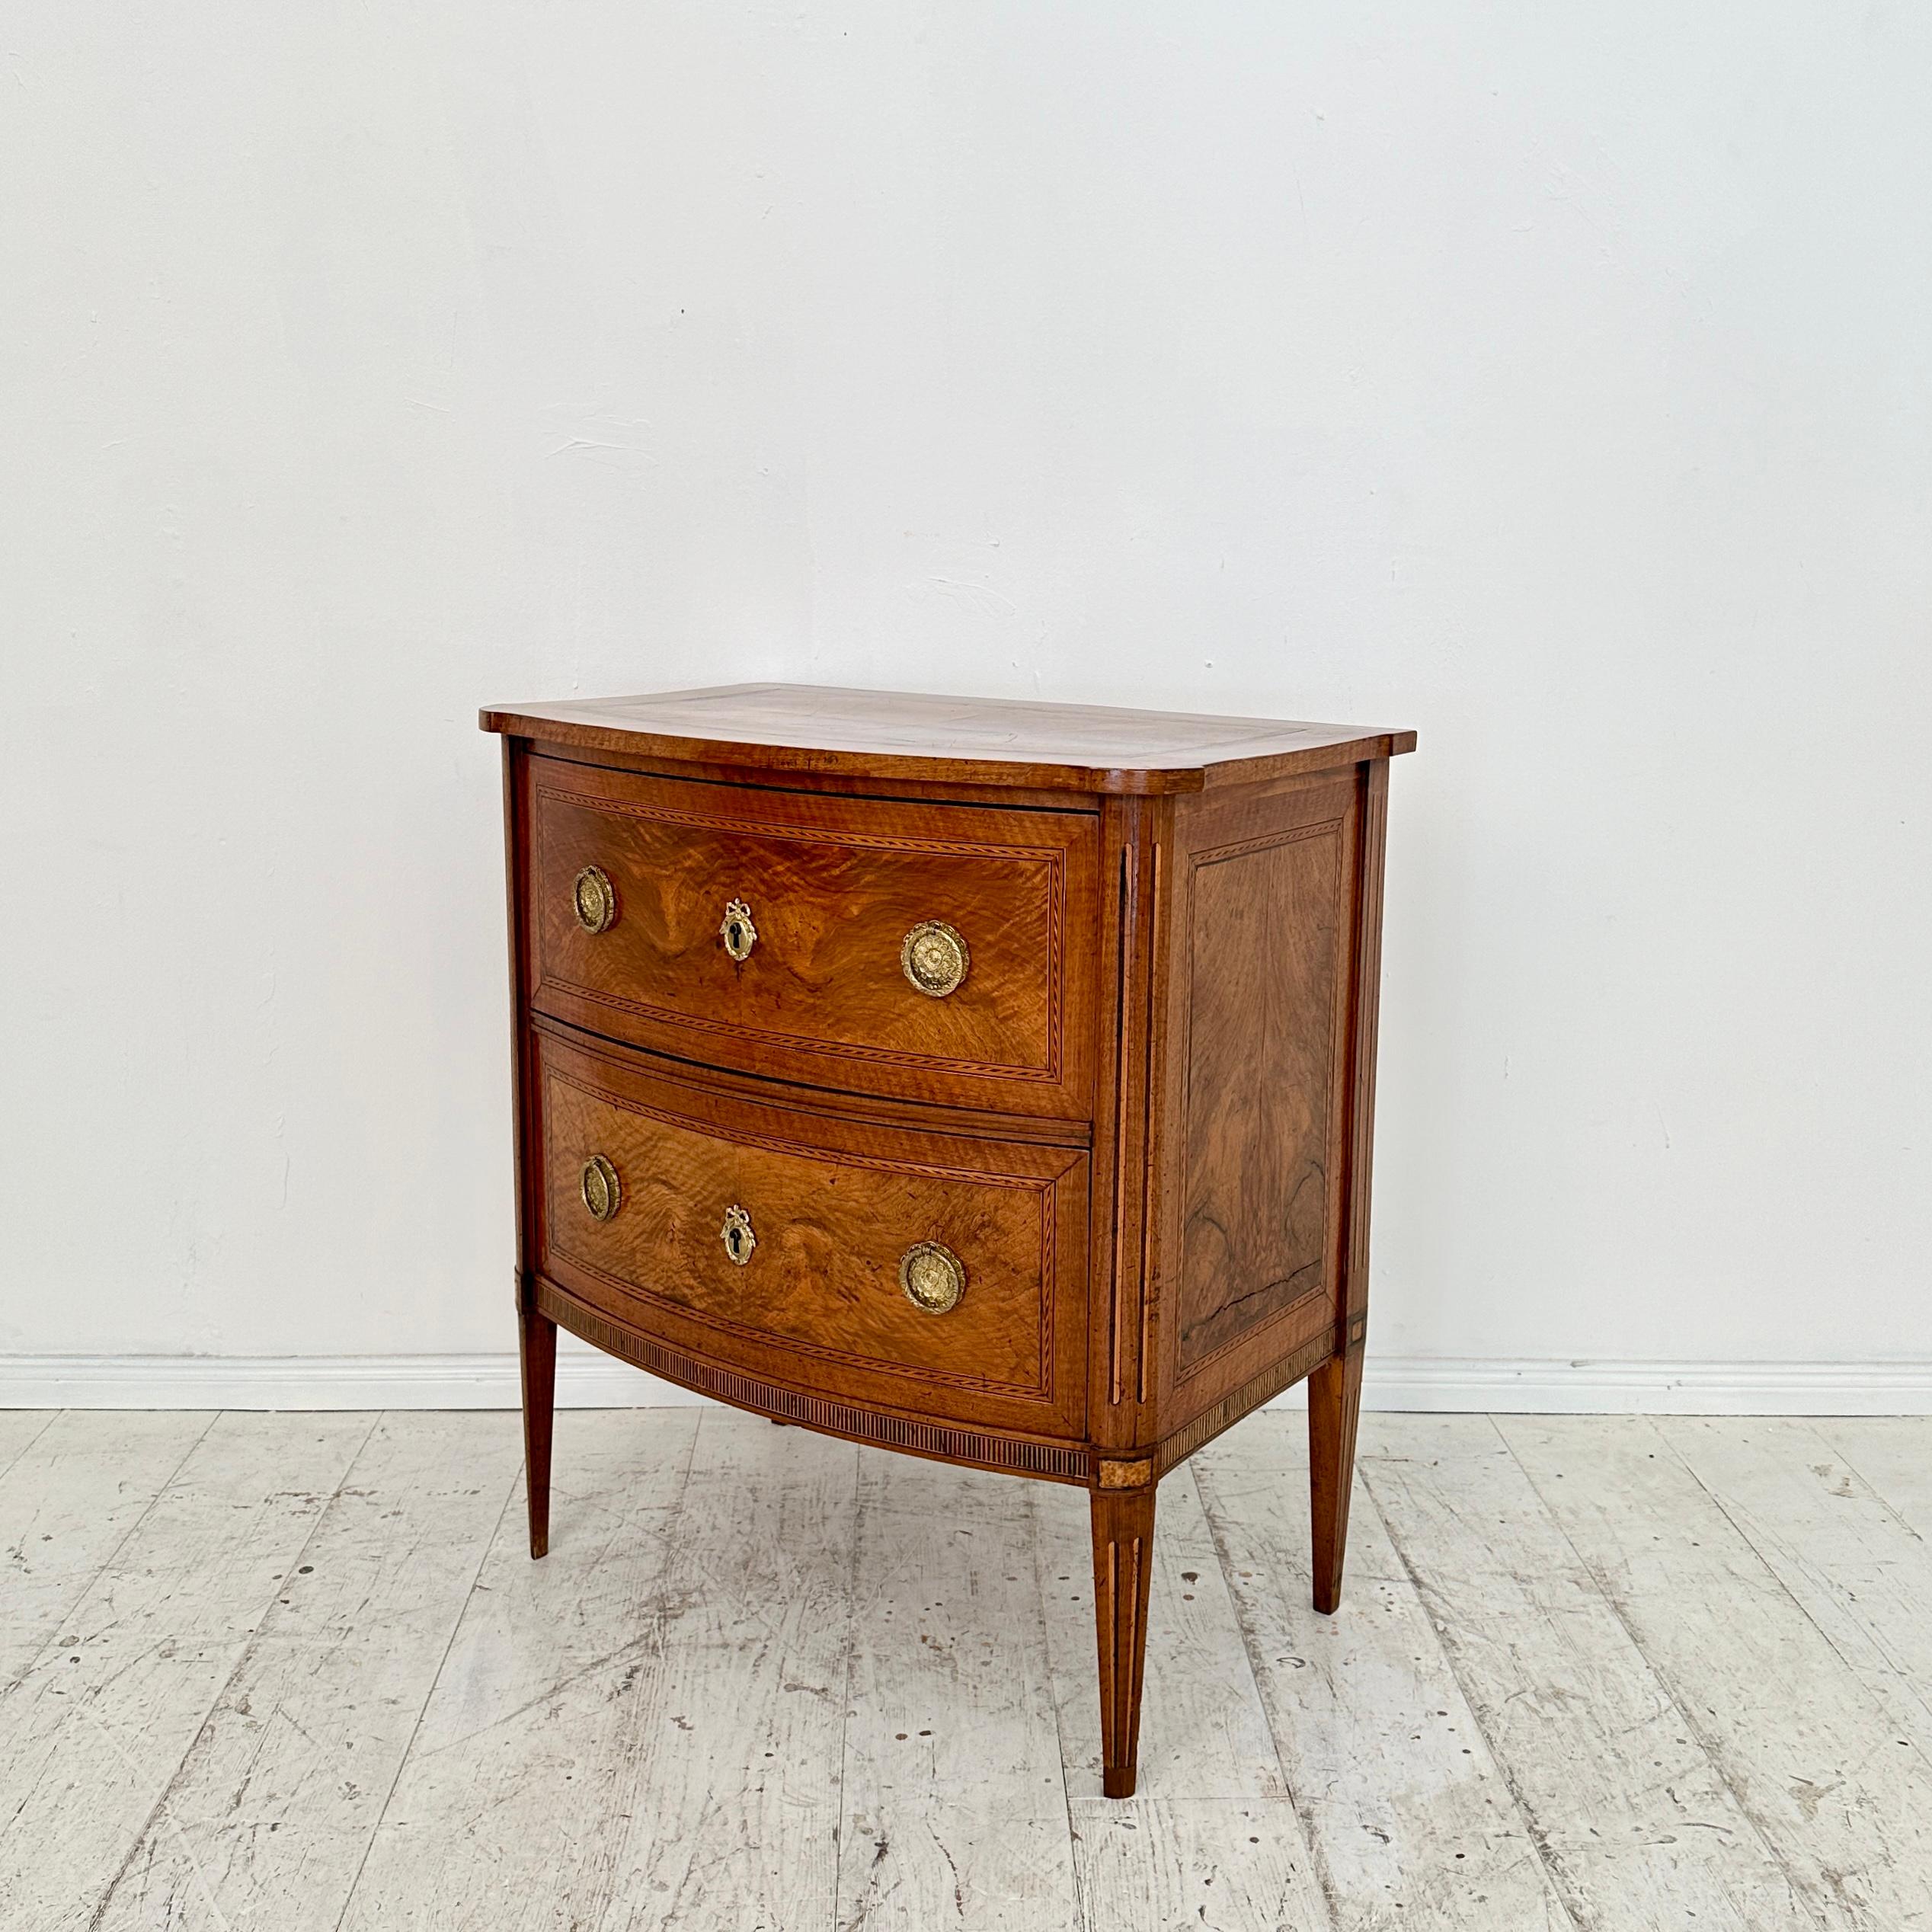 Late 18th Century Small 18th Century German Louis Seize Commode in Walnut with 2 Drawers, 1790 For Sale